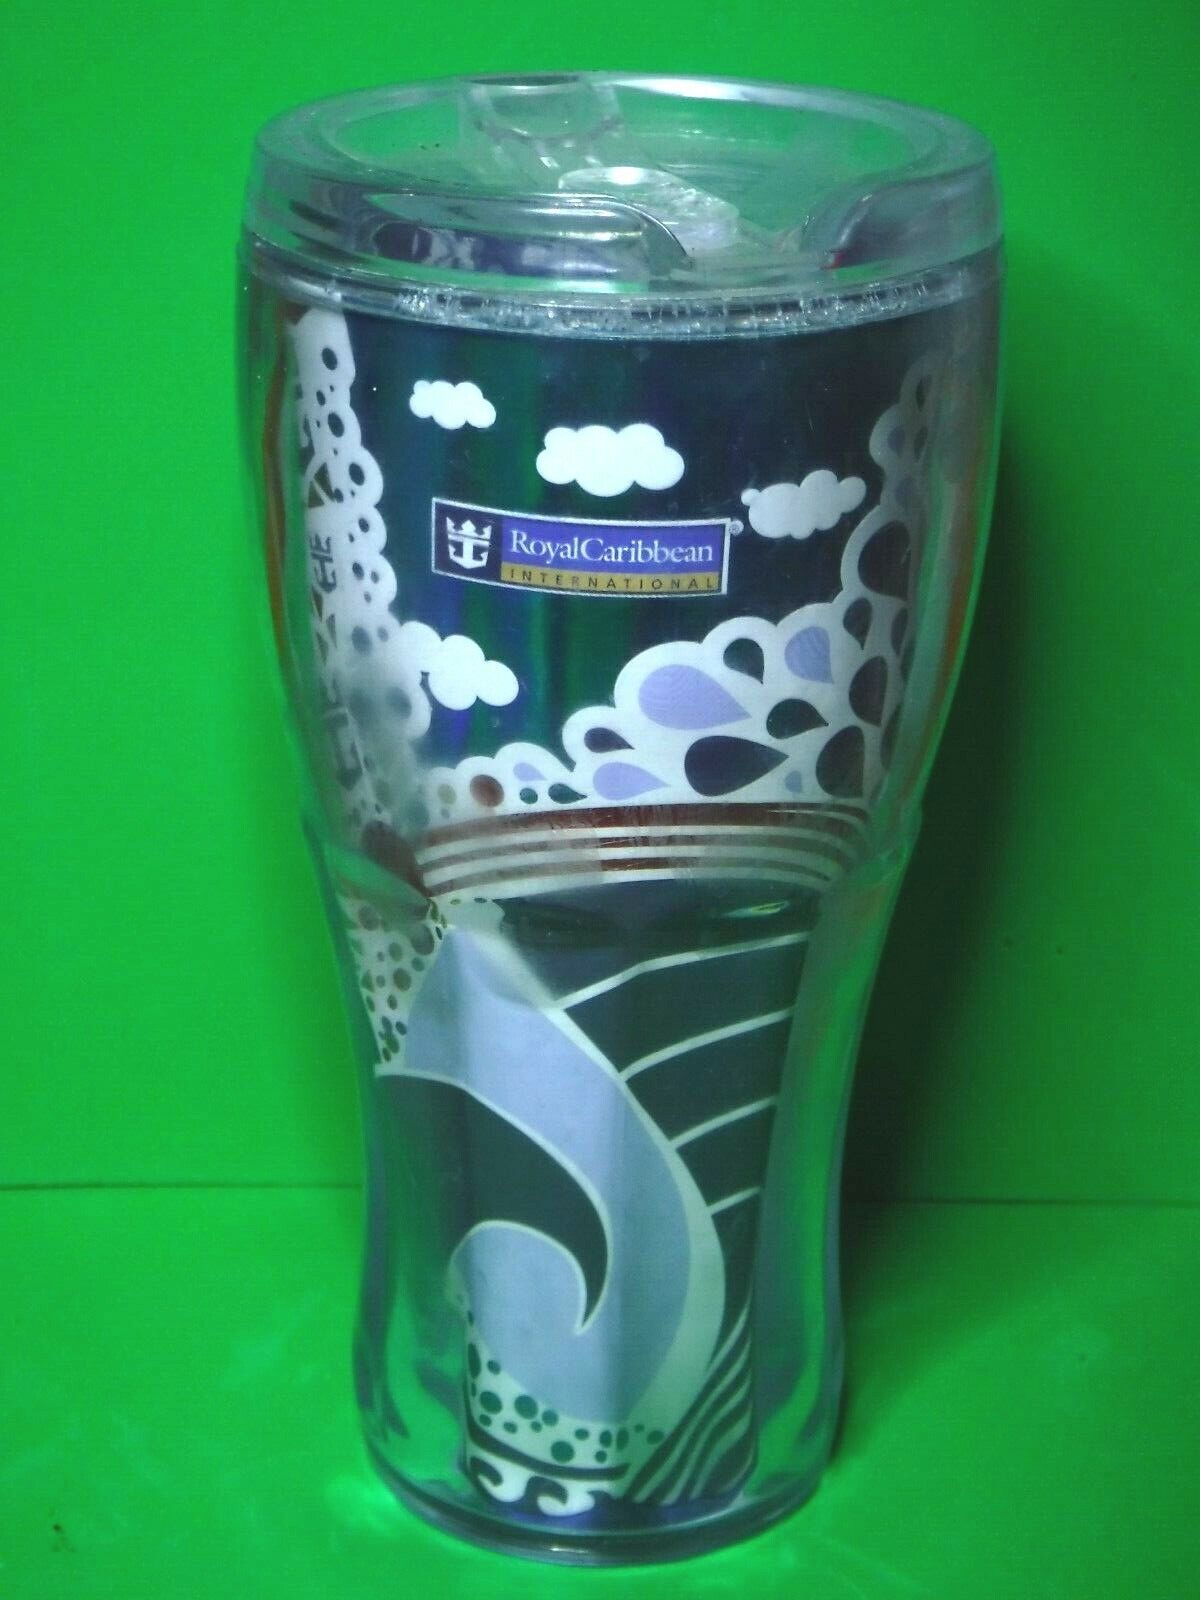 Royal Caribbean Coca Cola Tumbler Insulated Cup 2012 Whirley Drink Cup